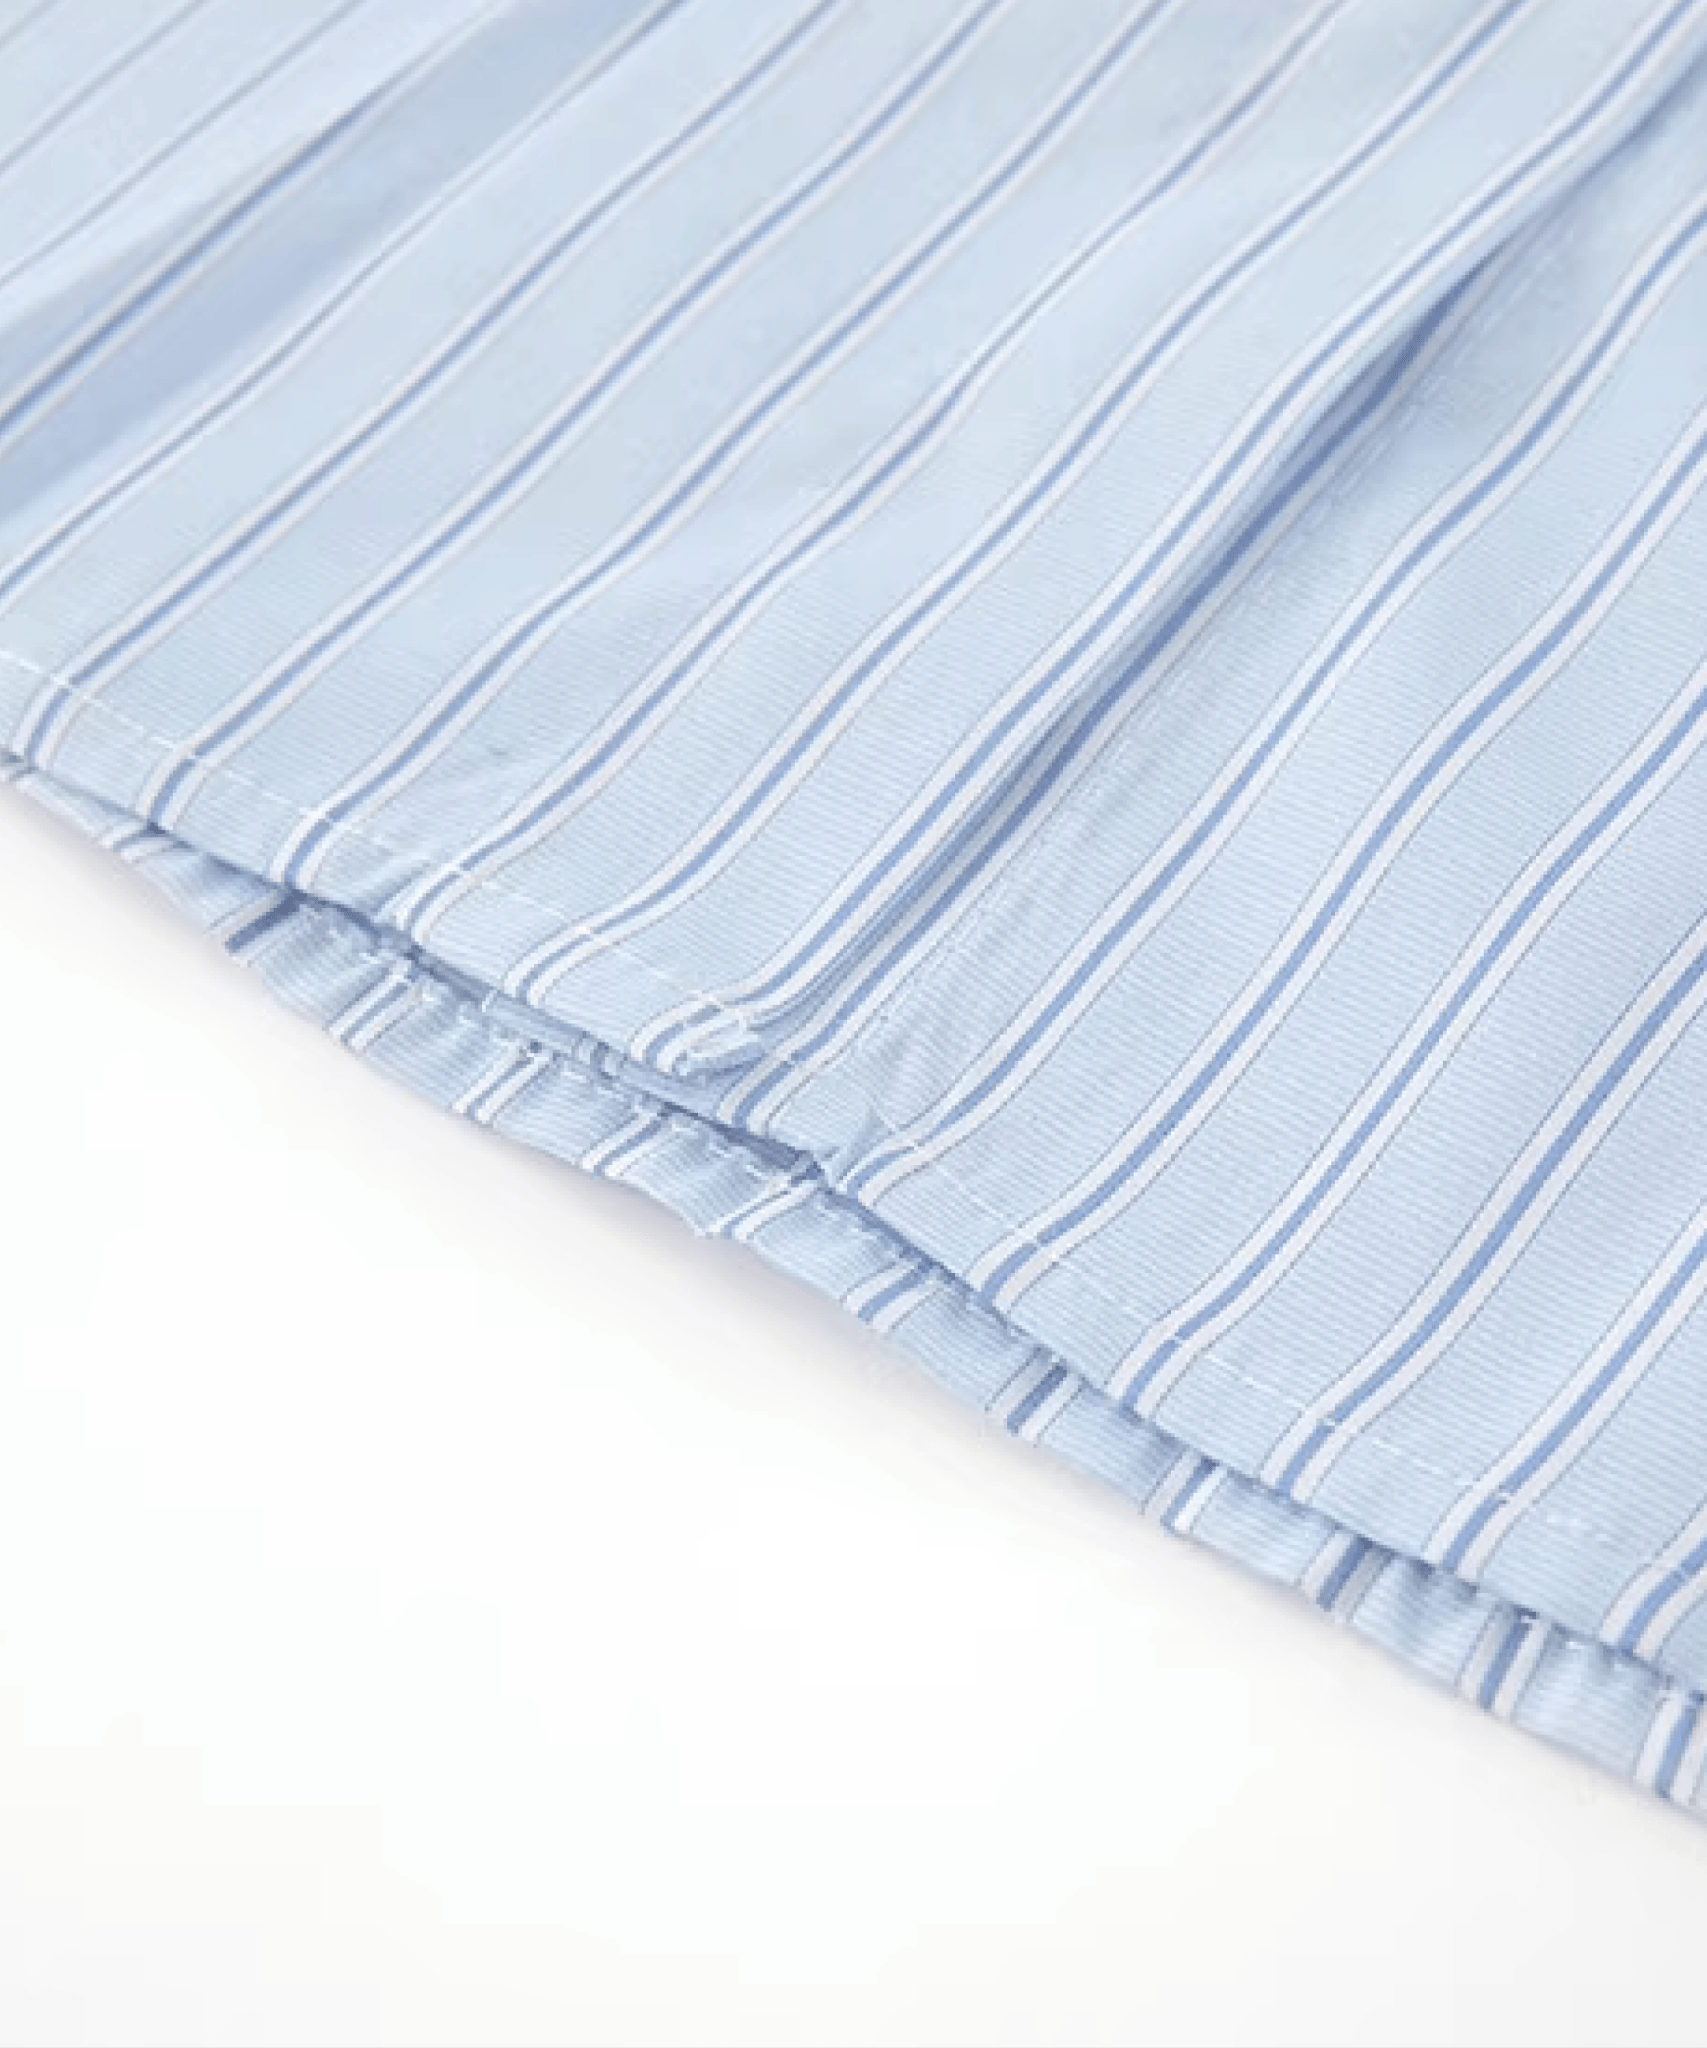 Stand Collar Stripe Shirt - LOVE POMME POMME